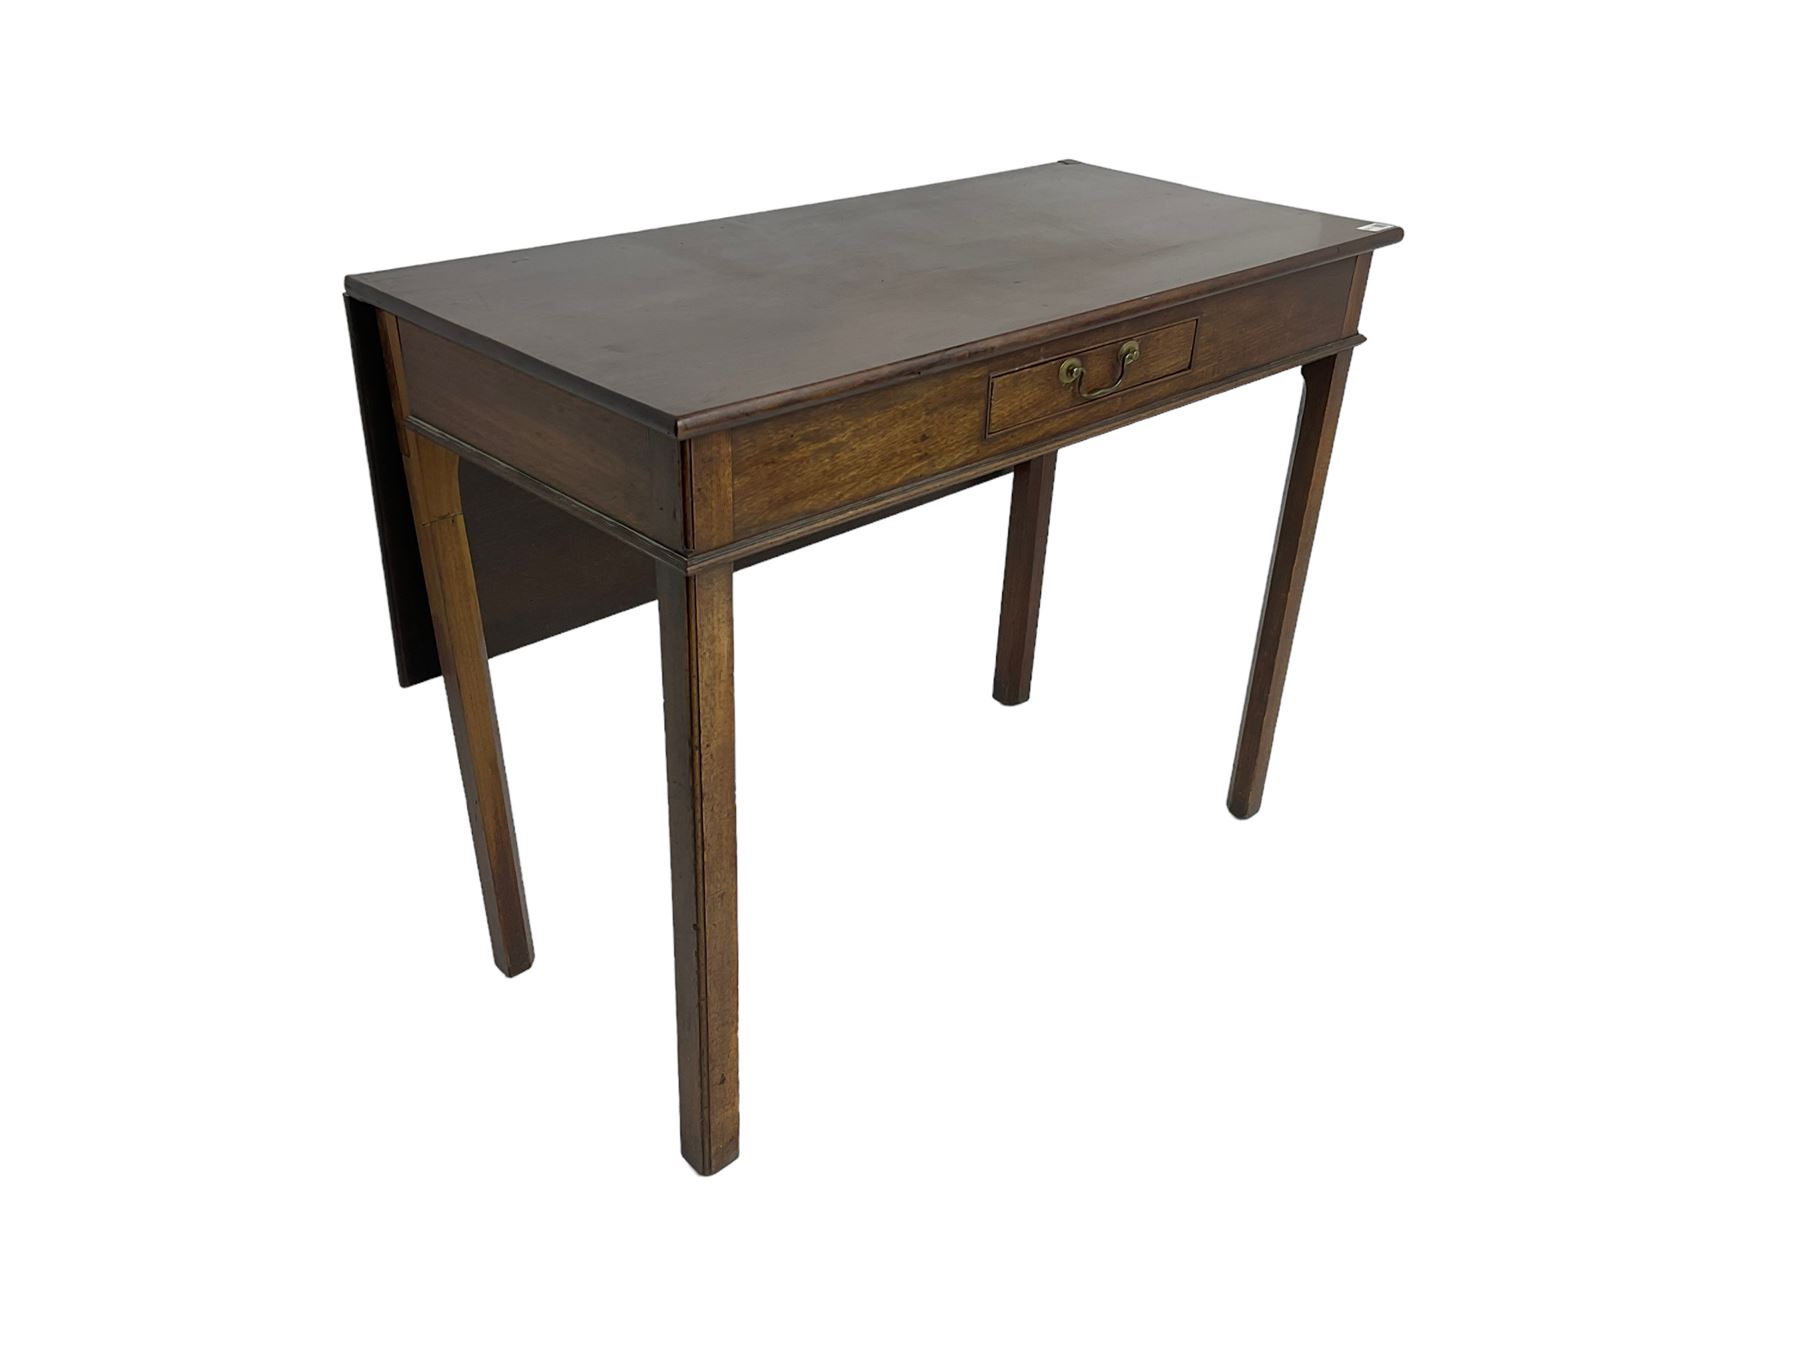 George III style mahogany drop-leaf side table with single frieze drawer - Image 2 of 2